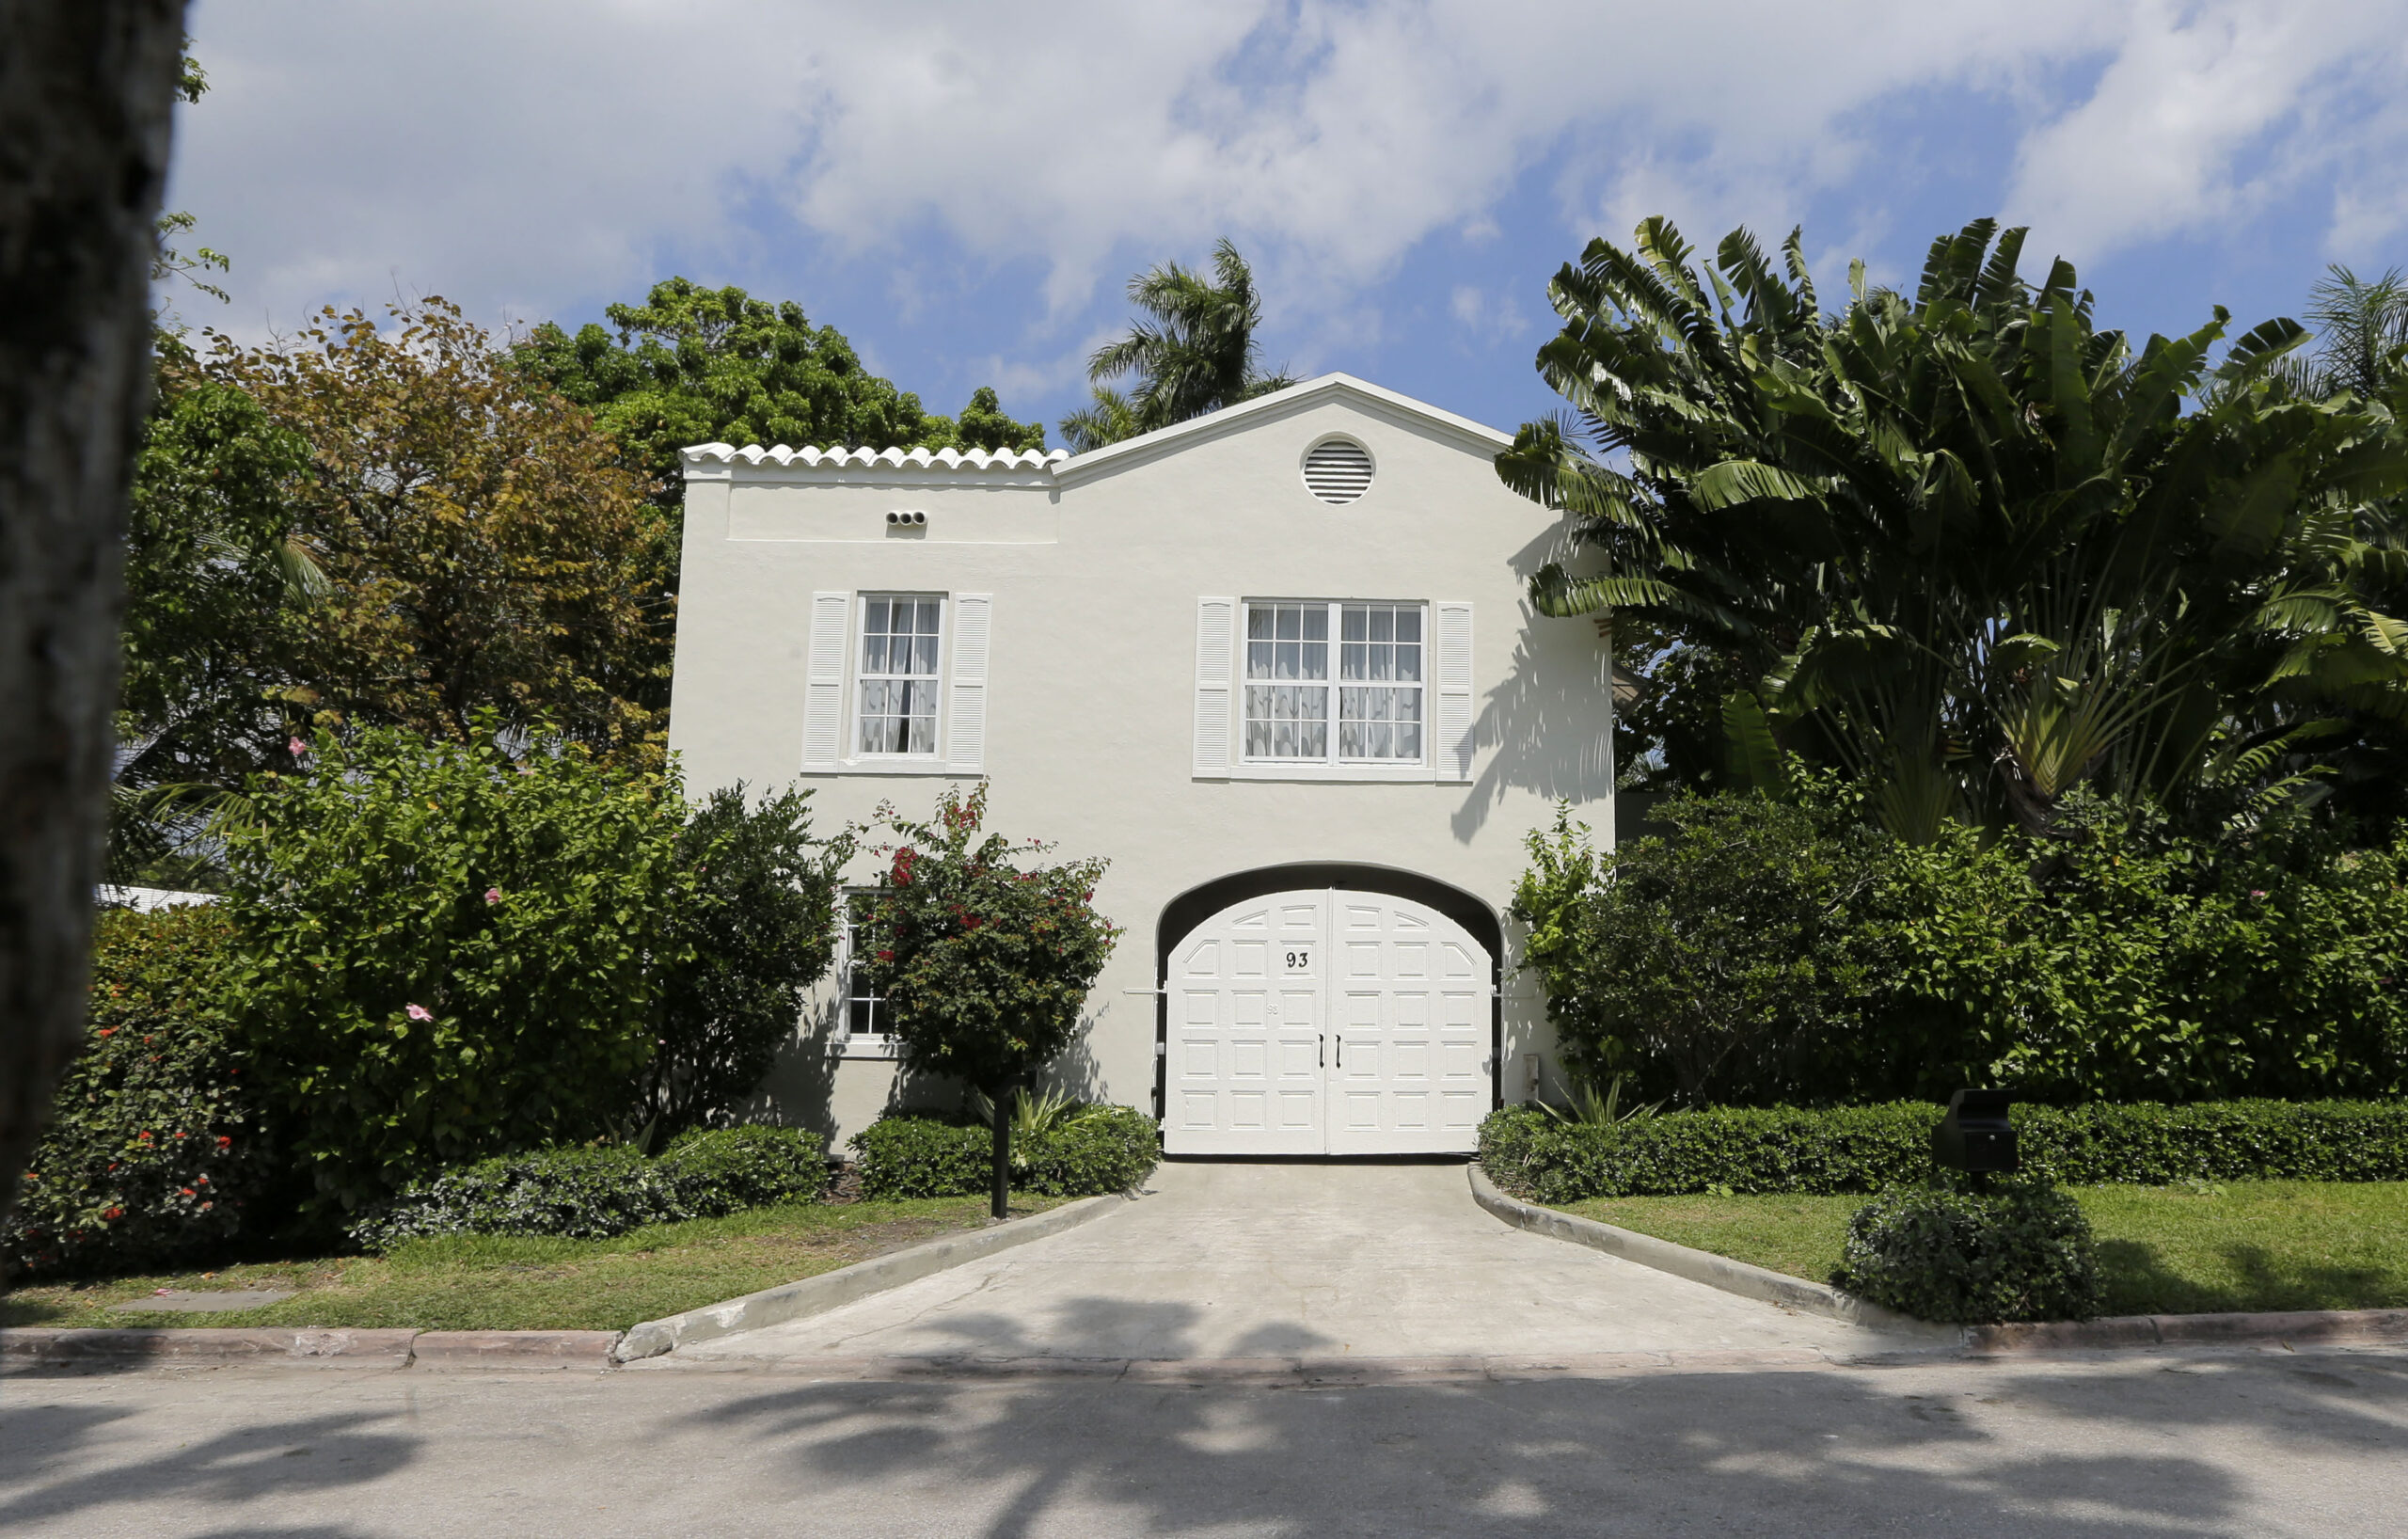 The gate house entrance of the waterfront mansion once owned by gangster Al Capone in Miami Beach, Fla., Wednesday, March 18, 2015. The South Florida house that Capone owned for nearly two decades, and died in, is facing demolition plans. The Miami Herald reported Thursday, Sept. 2, 2021 that the new owners of the nine-bedroom, Miami Beach house plan to demolish it after buying it for $10.75 million this summer. (AP Photo/Alan Diaz)